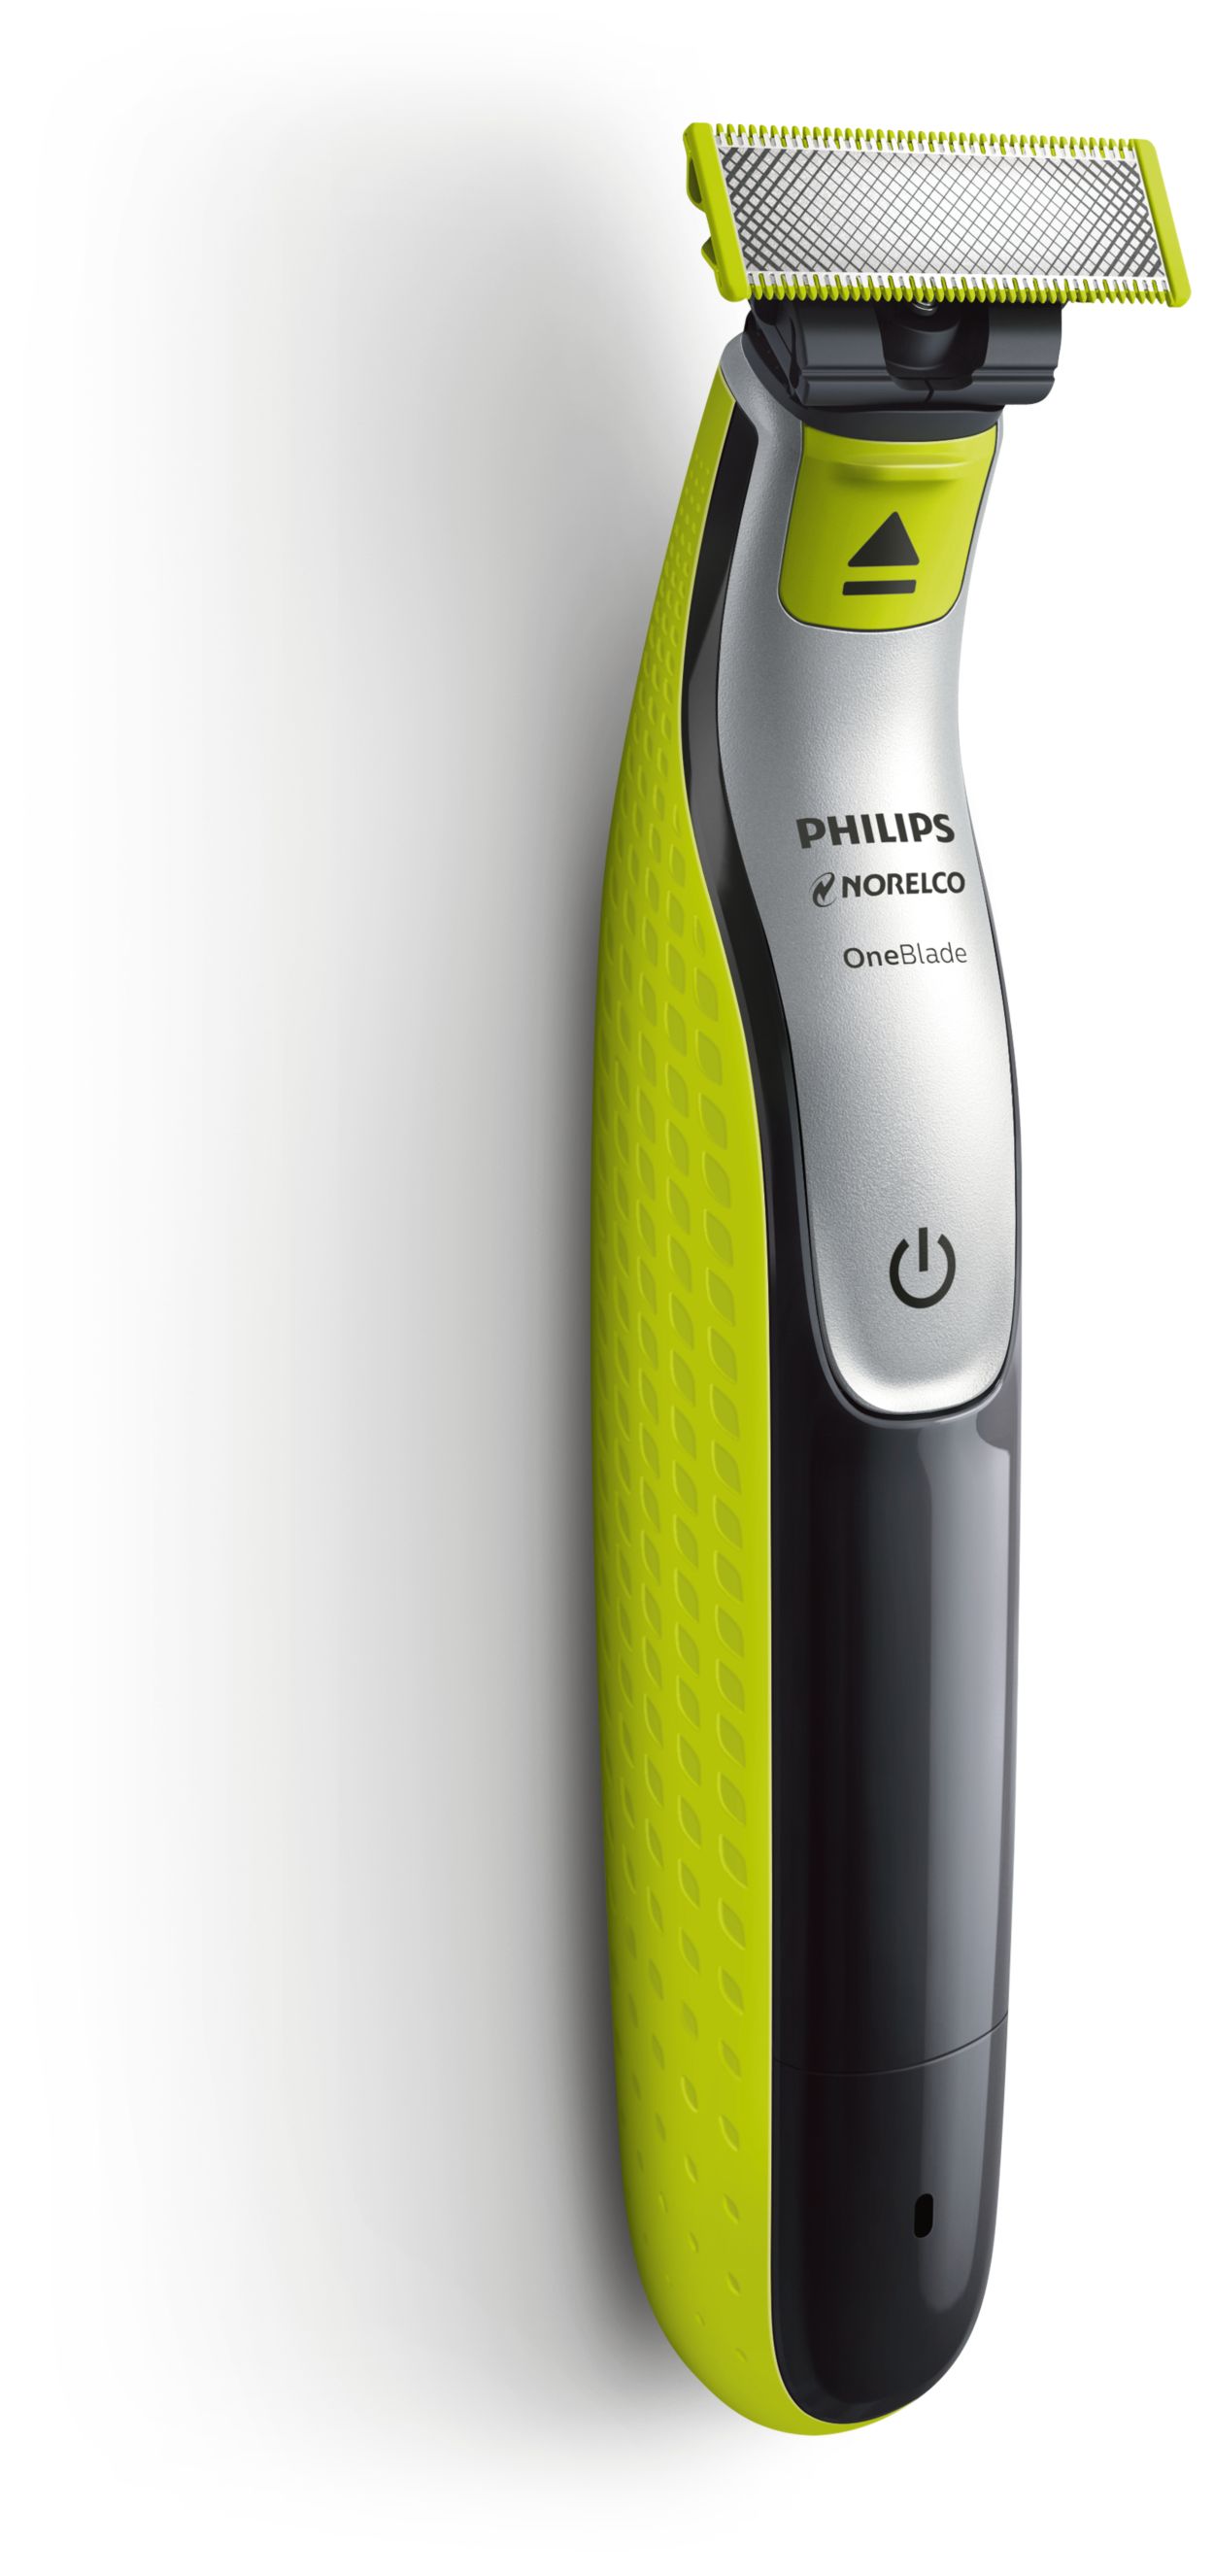 Philips OneBlade Face & Body Model QP2630/30, Trimming, Styling, Shaving,  for Any Hair Length, Includes 1 Original Blade and 6 Trim Attachments :  : Health & Personal Care